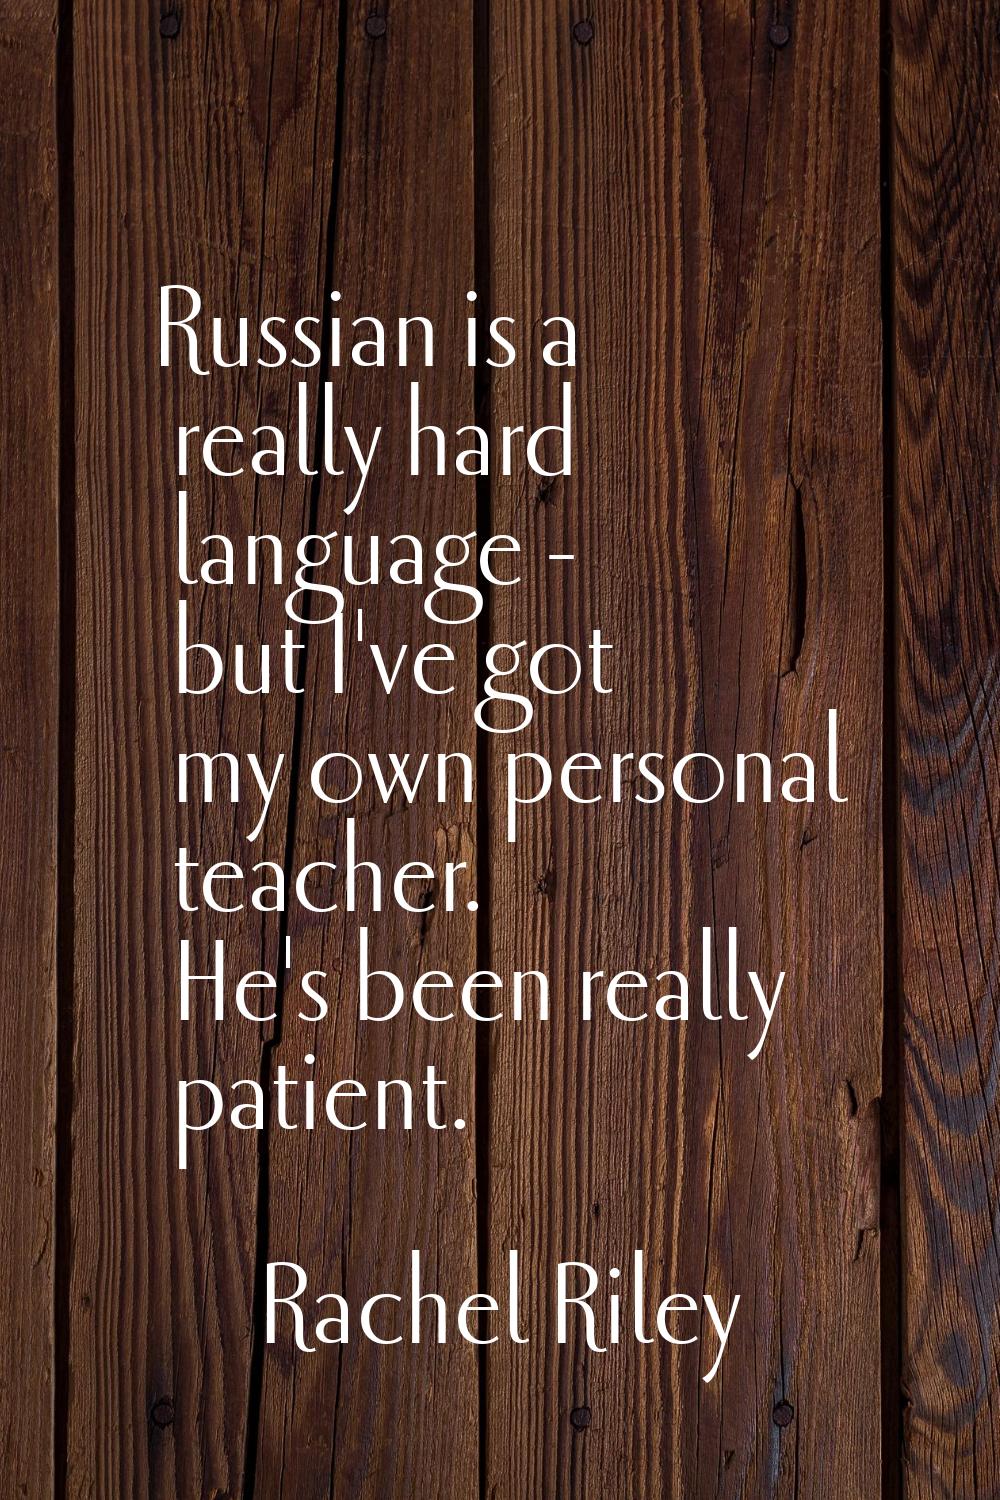 Russian is a really hard language - but I've got my own personal teacher. He's been really patient.